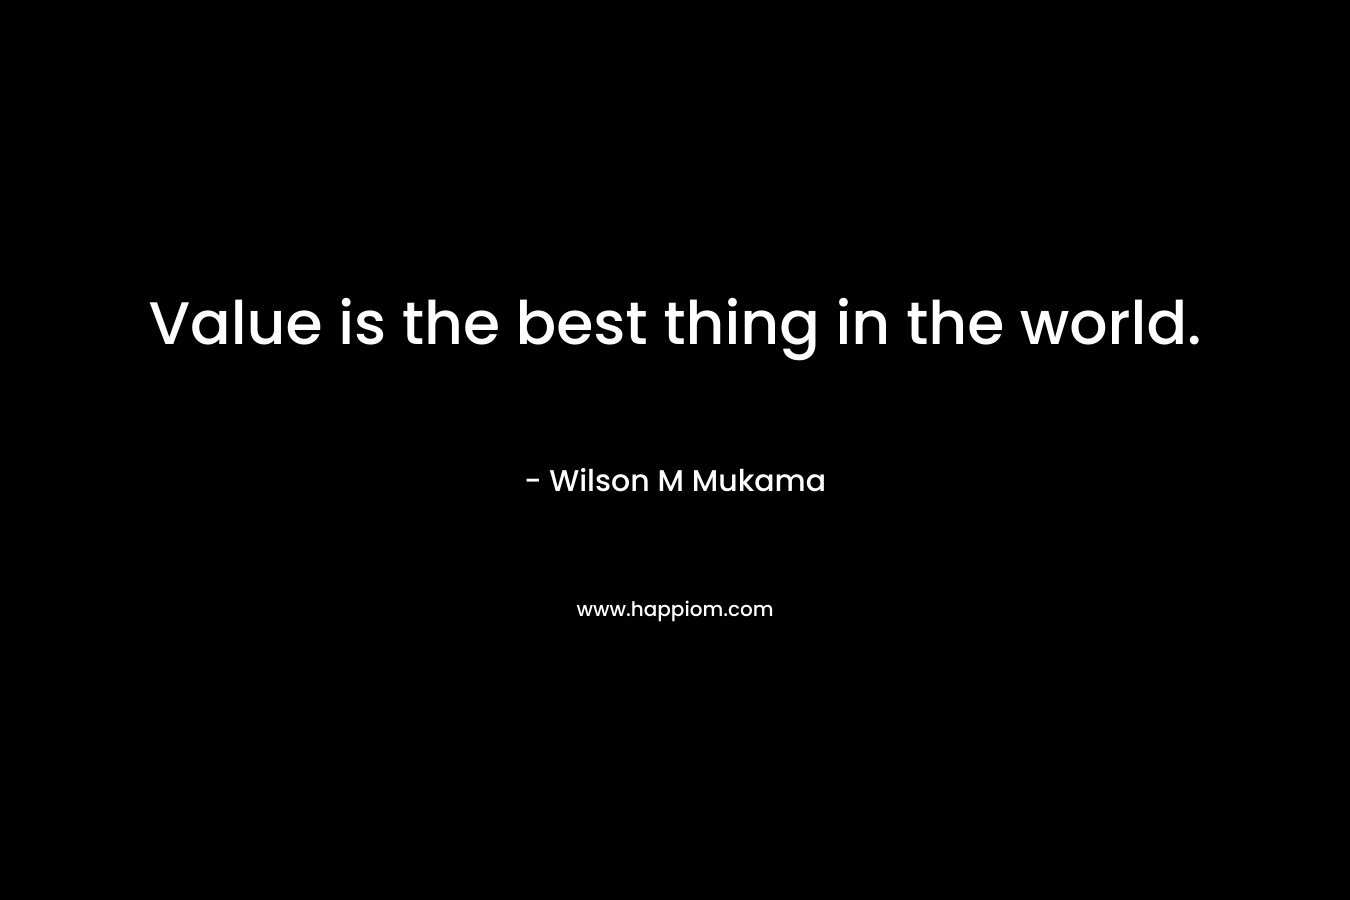 Value is the best thing in the world. – Wilson M Mukama